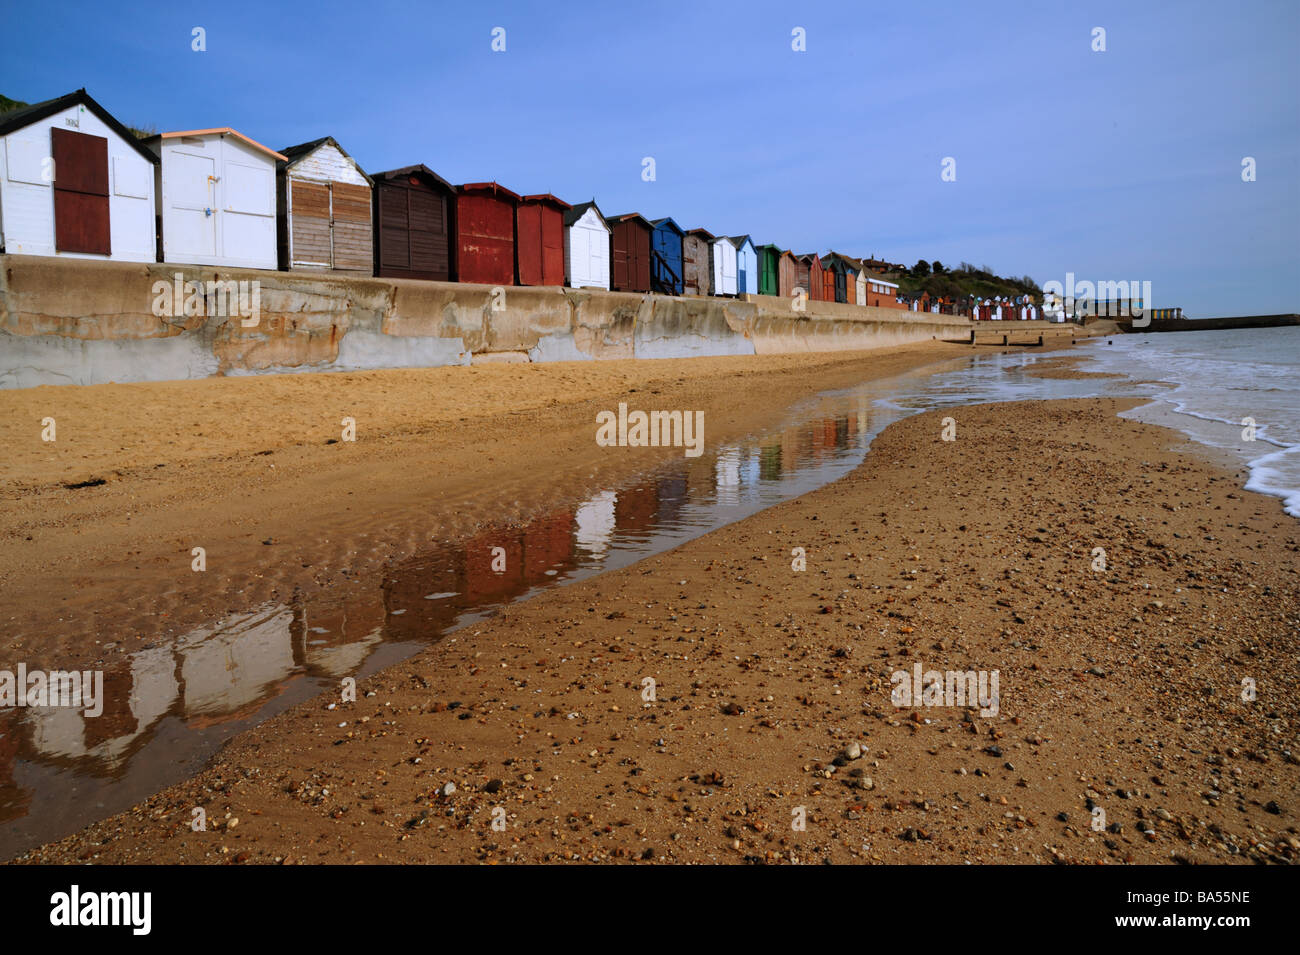 WALTON-ON-THE NAZE, ESSEX, Großbritannien - 05. APRIL 2009: Beach Huts On with Reflection in Water on the Beach Stockfoto